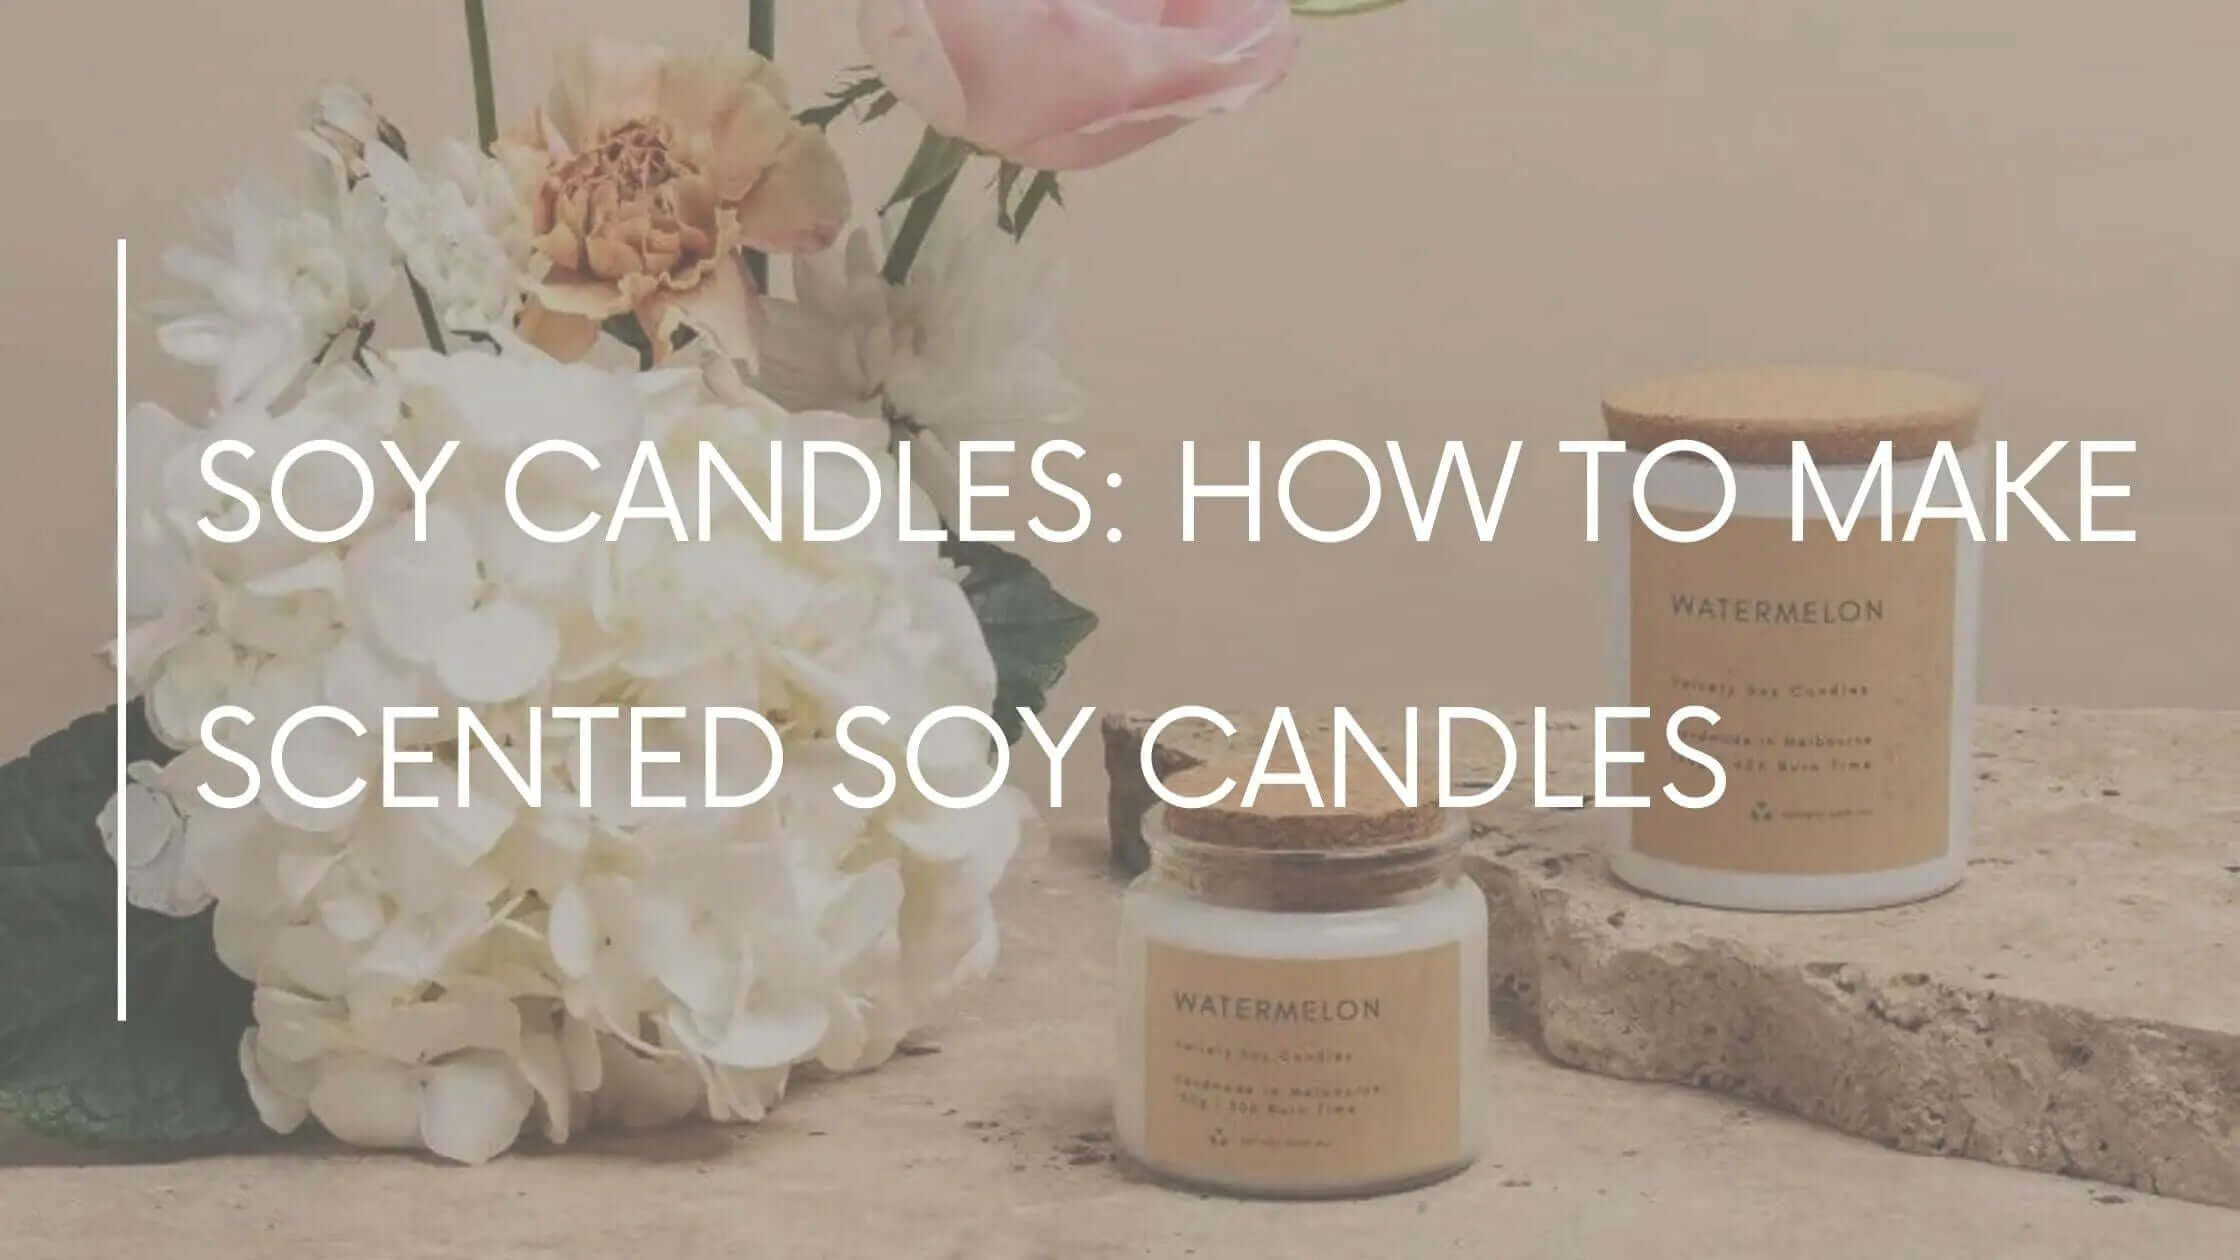 Soy Candles: How to Make Scented Soy Candles